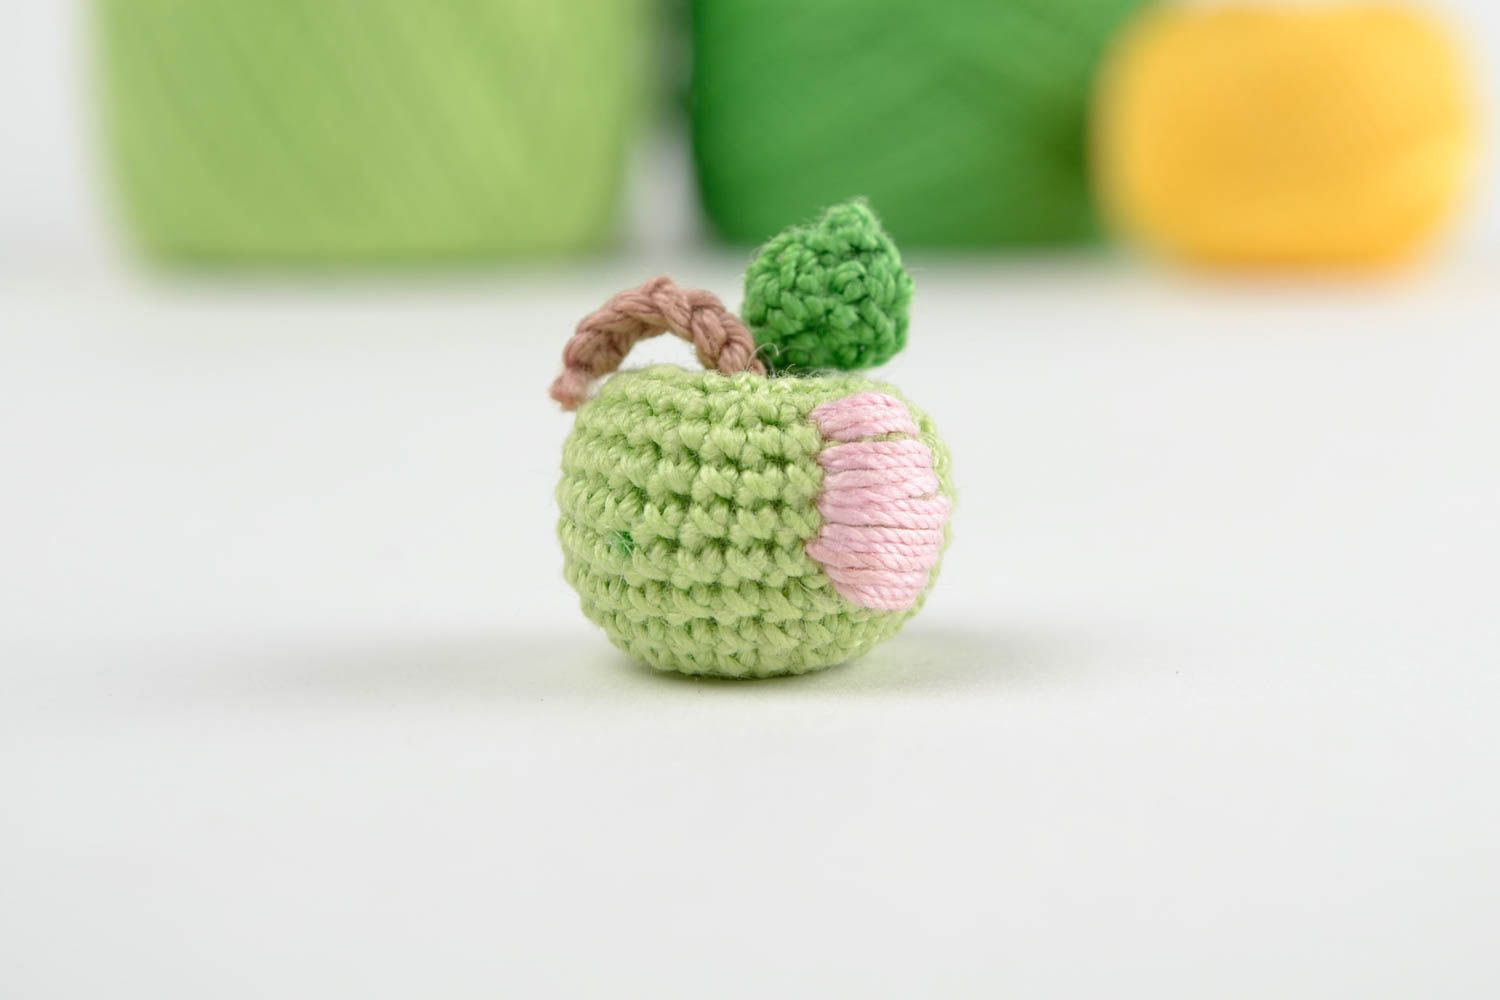 Handmade toy designer toy for baby crocheted toy unusual soft toy for kids photo 1